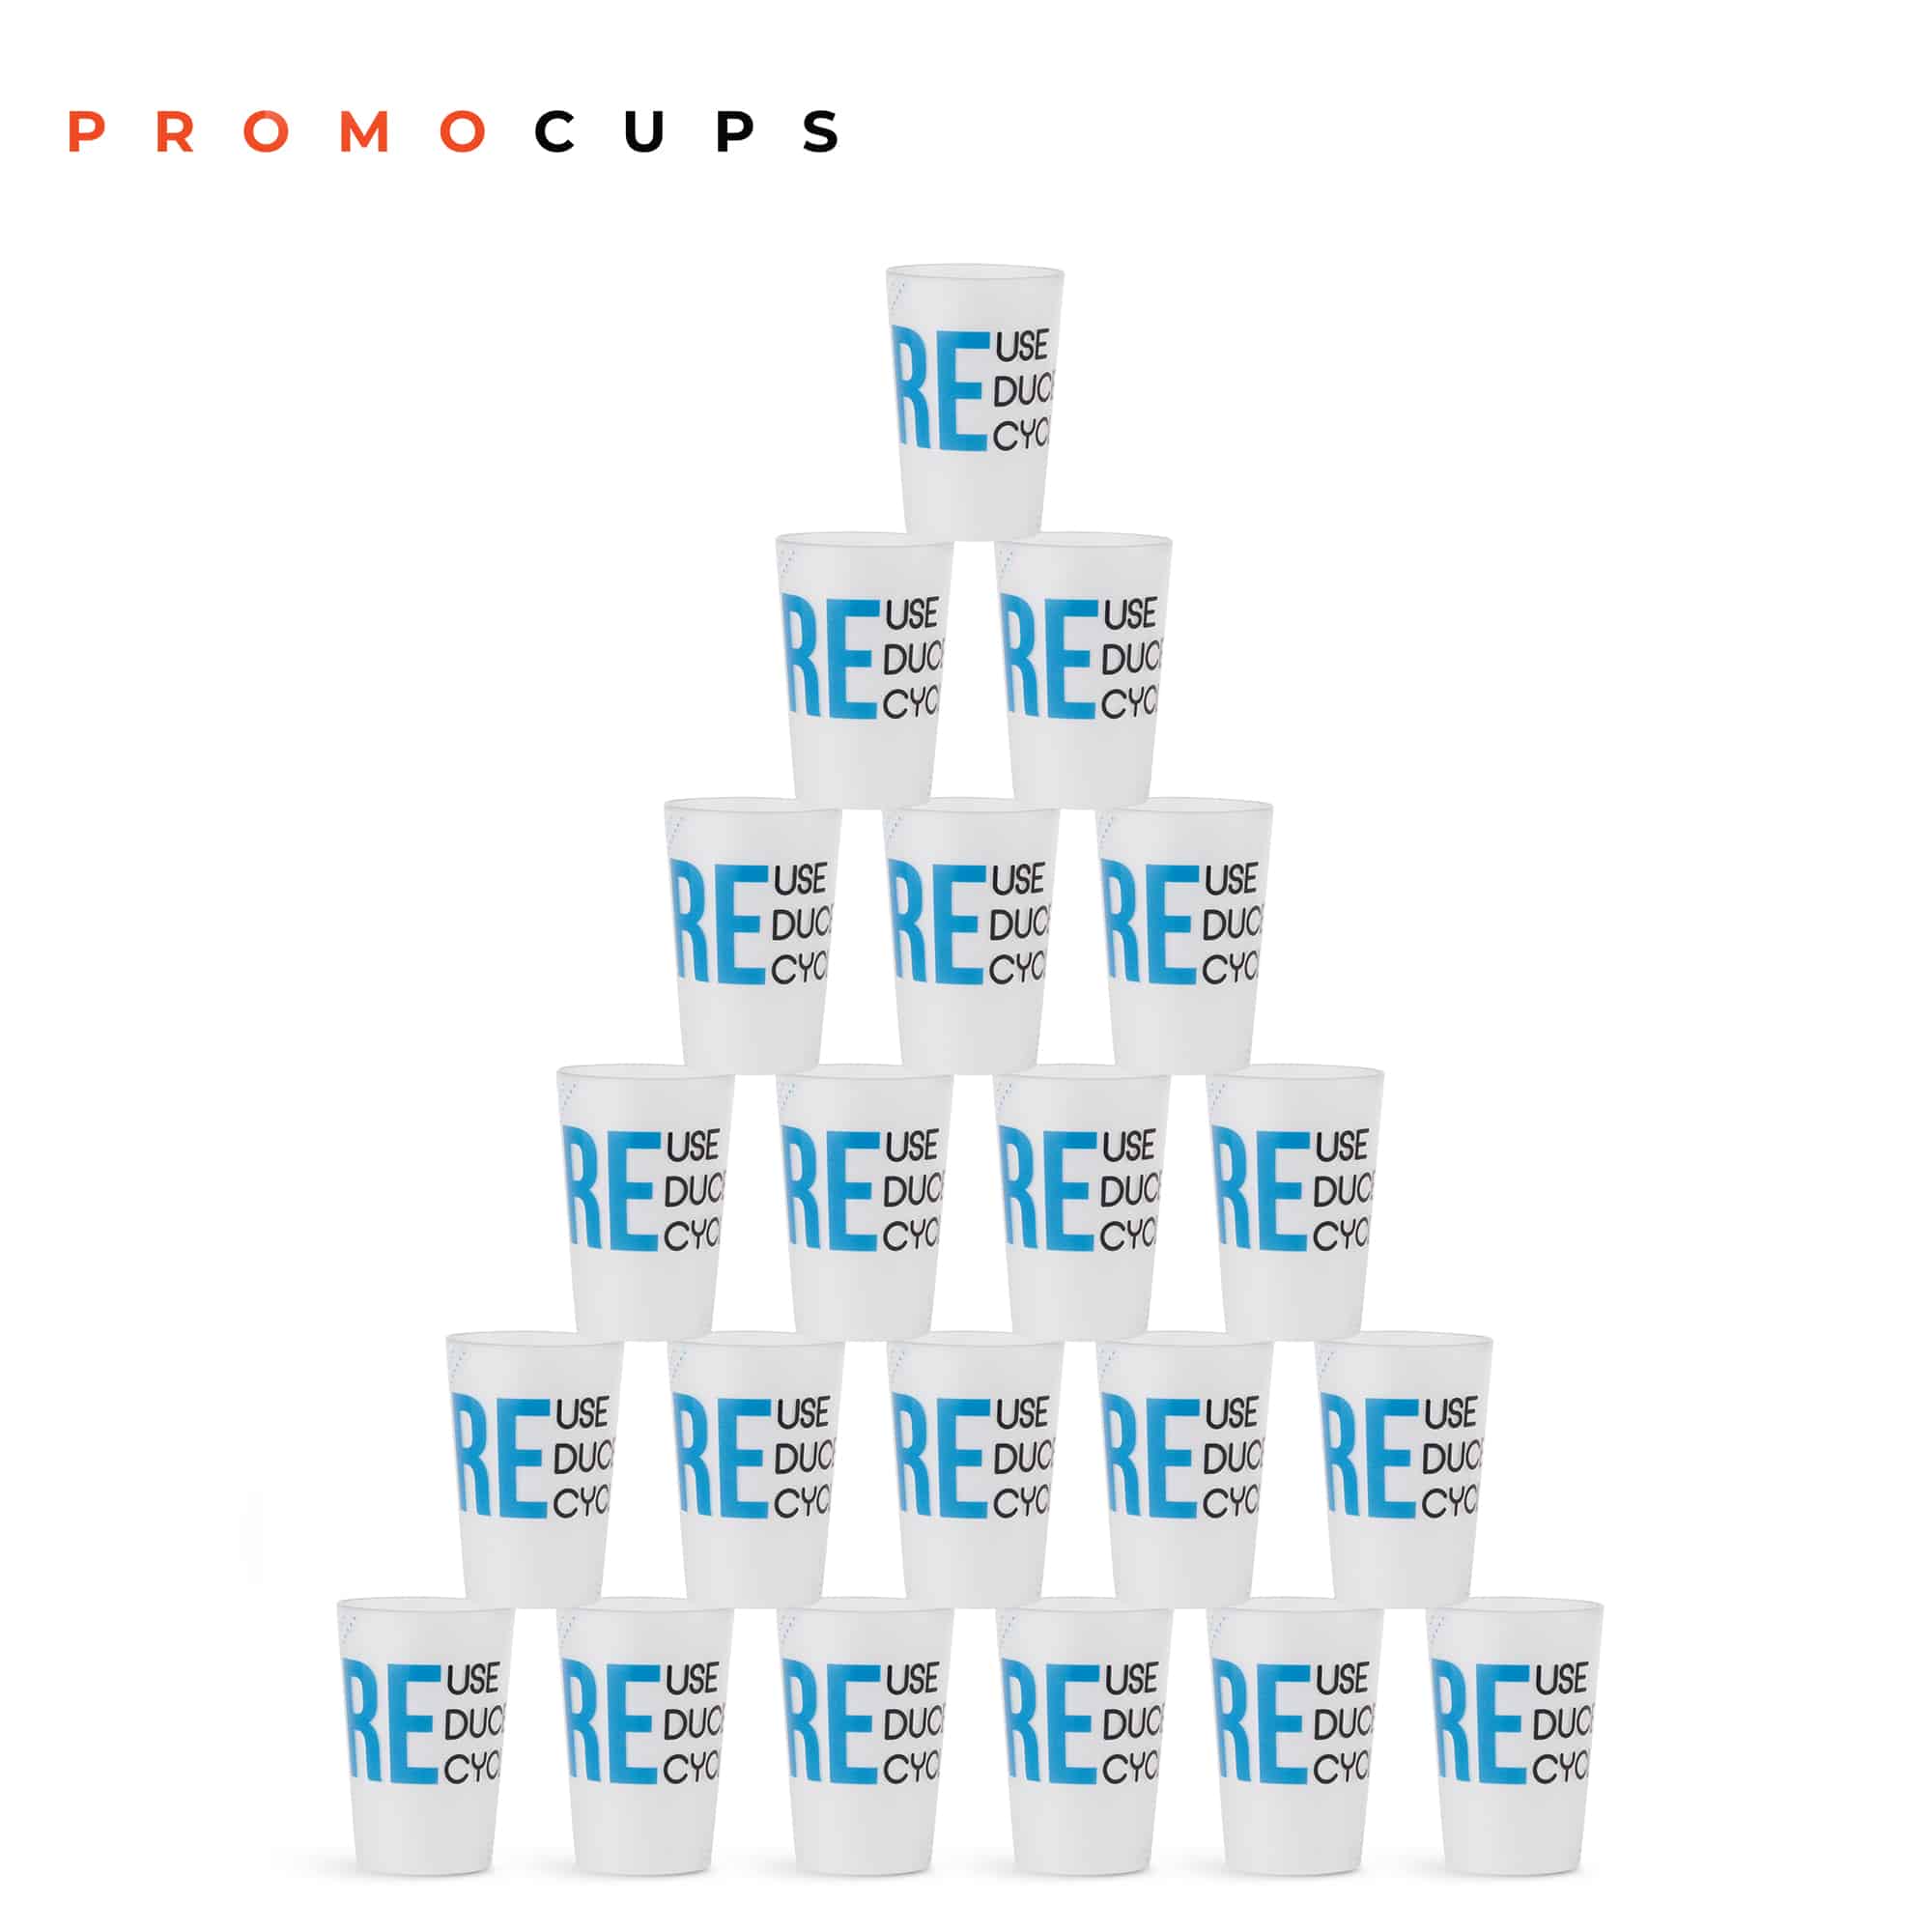 Promocups | The importance of reusable cups